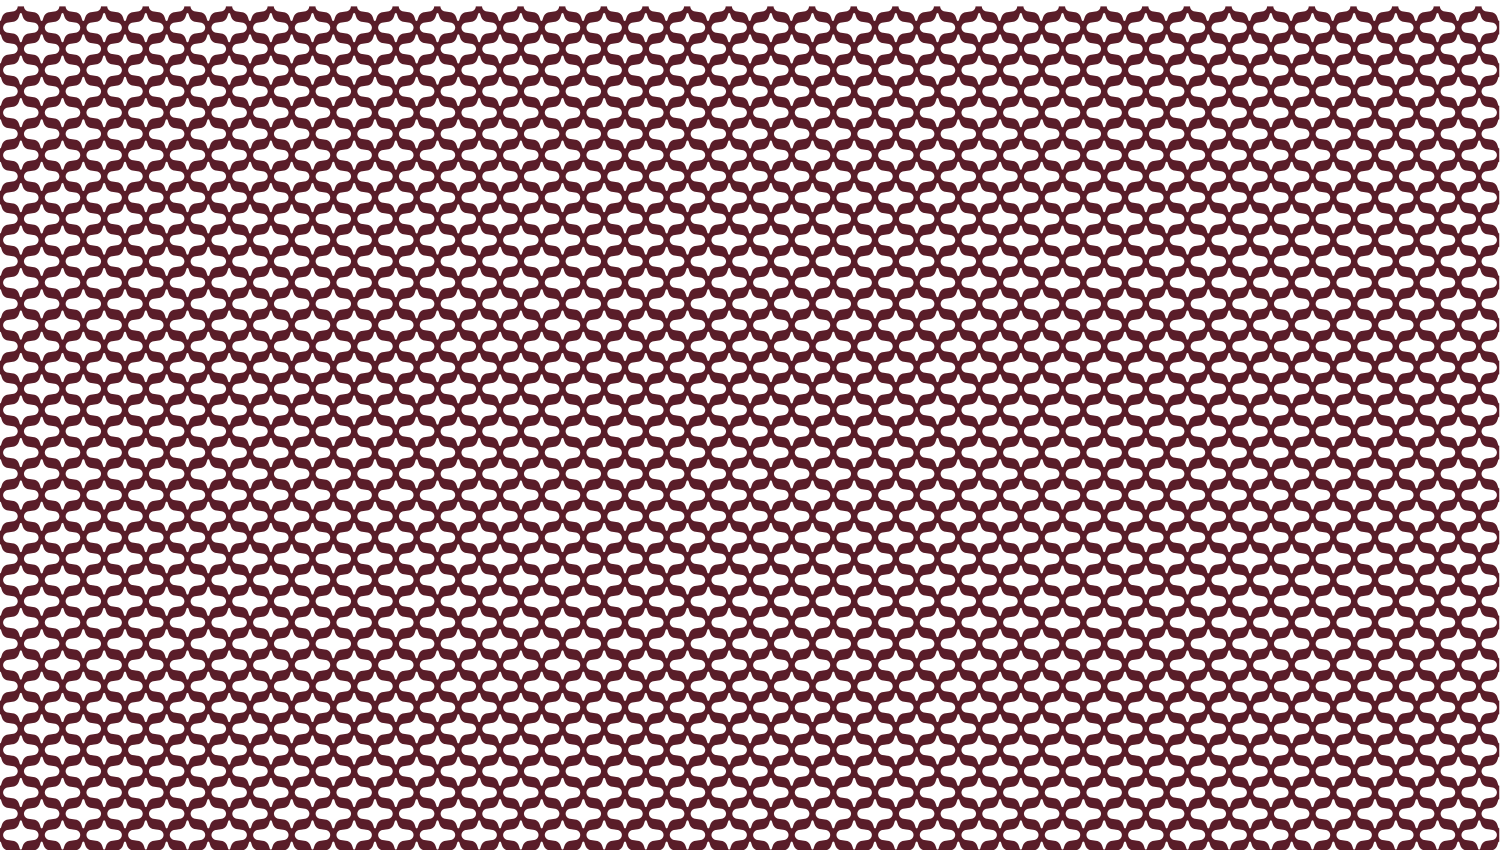 Parasoleil™ Seville© pattern displayed with a burgundy color overlay